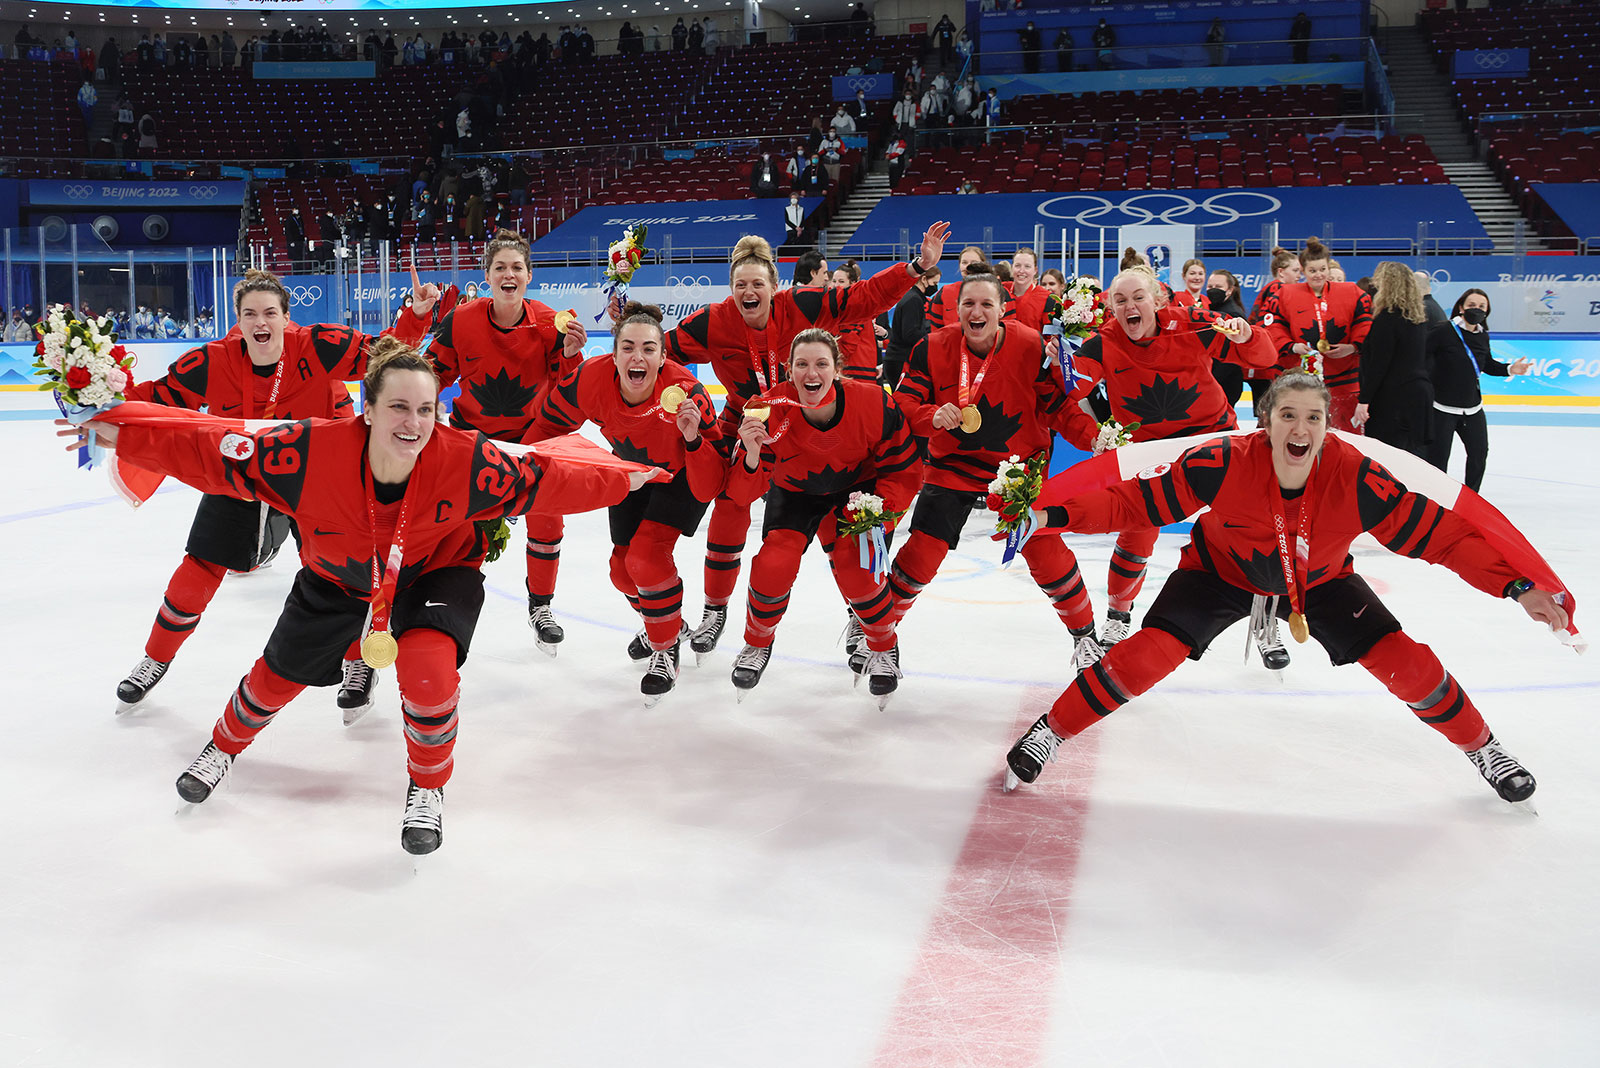 Players from Canada's women's hockey team celebrate with their gold medals after defeating the United States on February 17.